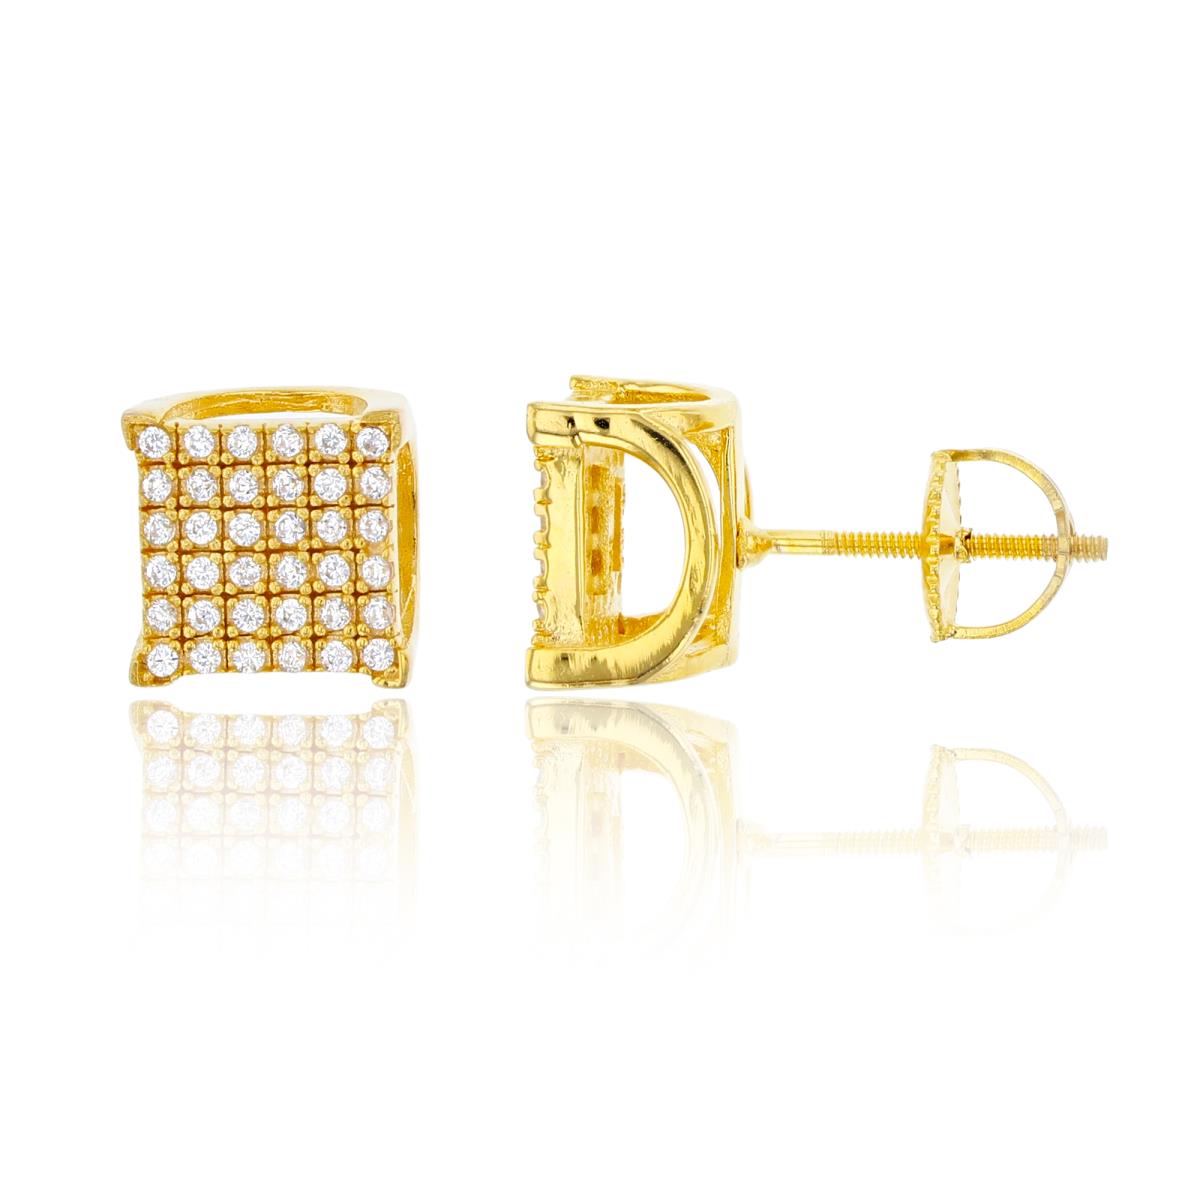 Sterling Silver Yellow 1-Micron 12x12mm 3D Square Screwback Stud Earring